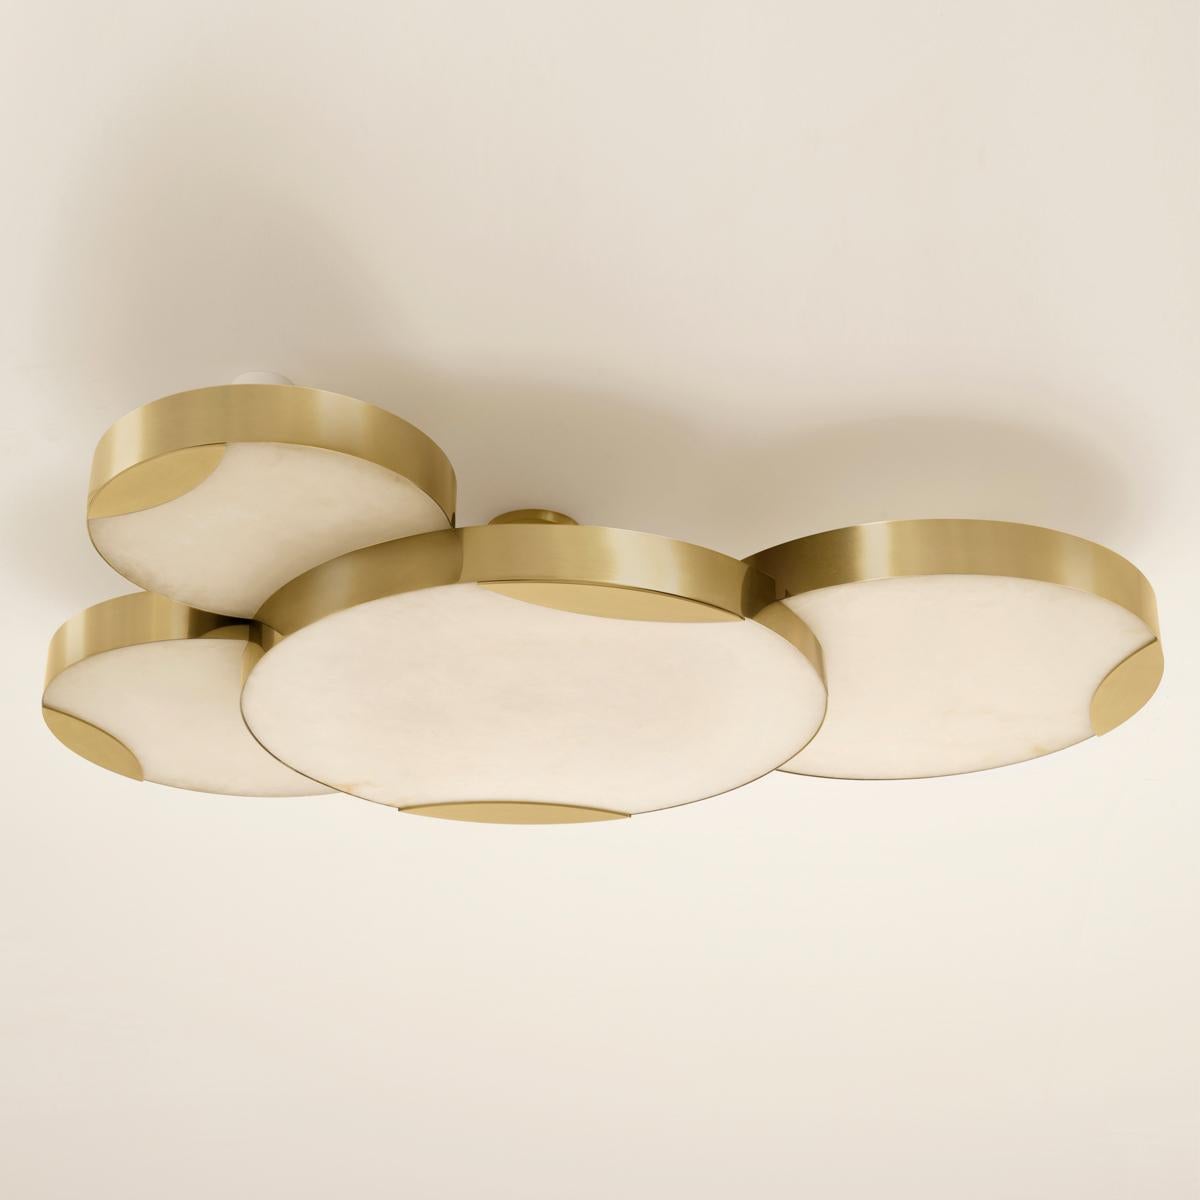 Italian Cloud N.4 Ceiling Light by Gaspare Asaro-Satin Brass Finish For Sale